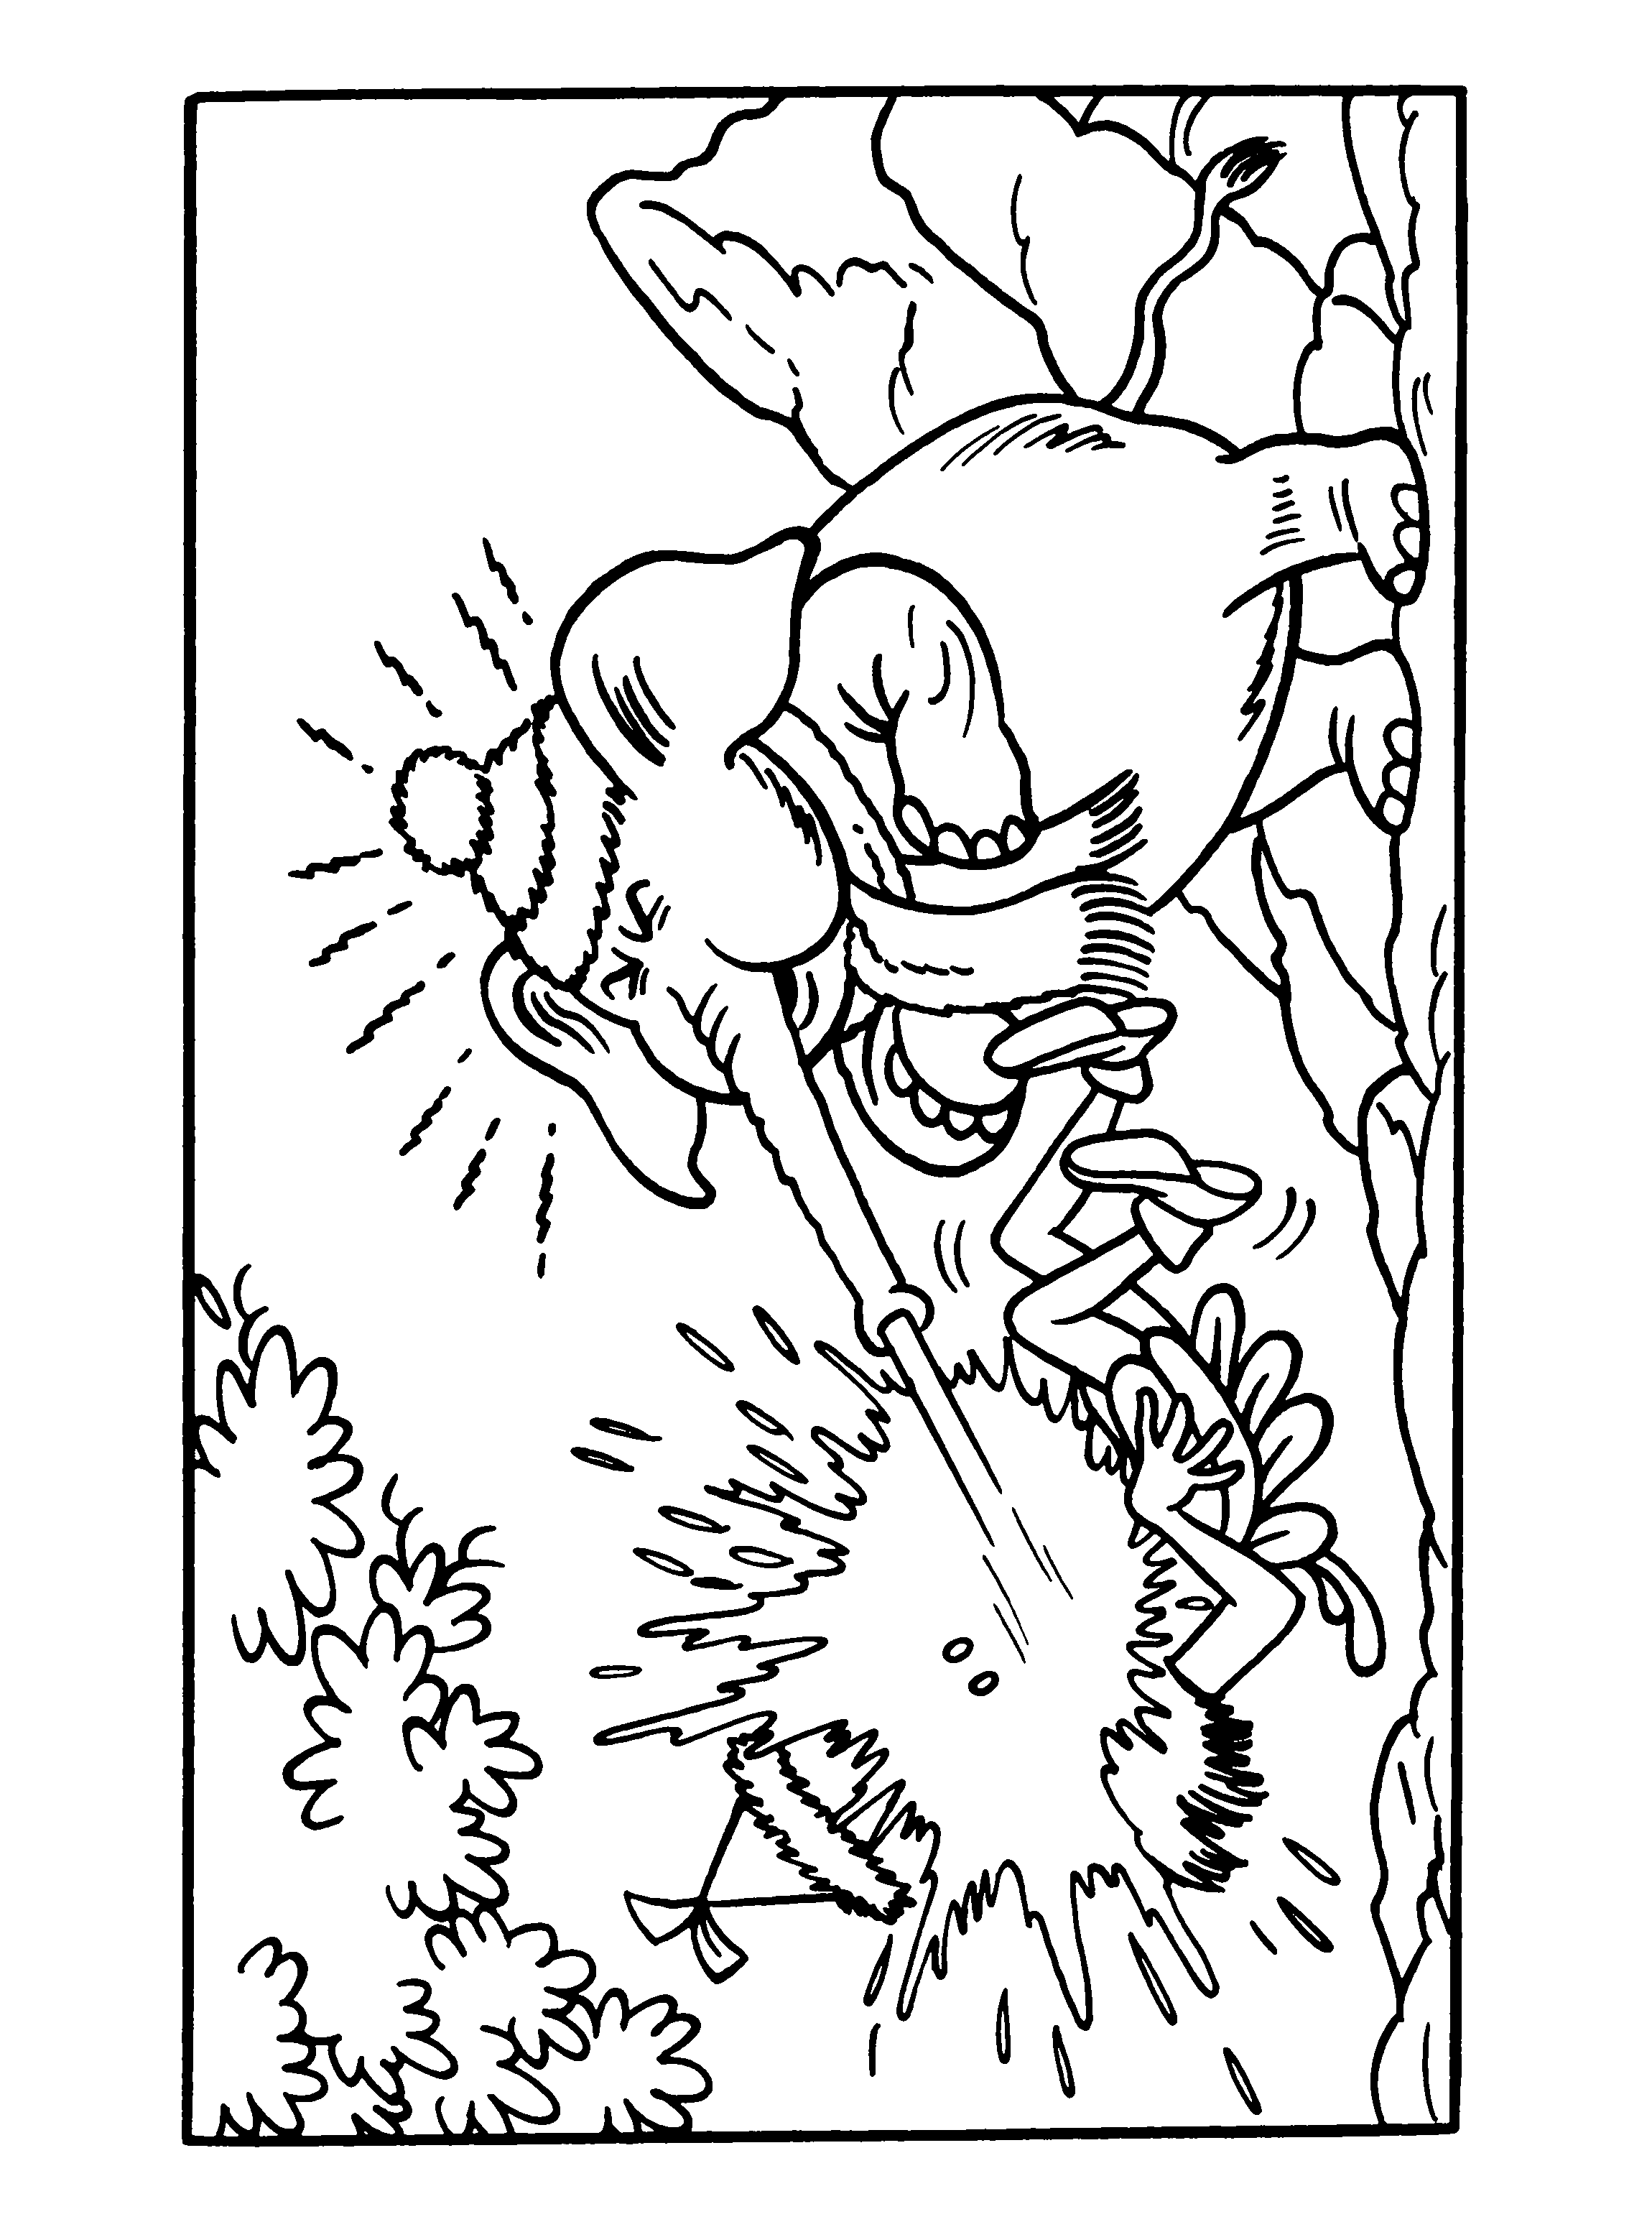 Coloring Page - Spike and suzy coloring pages 57